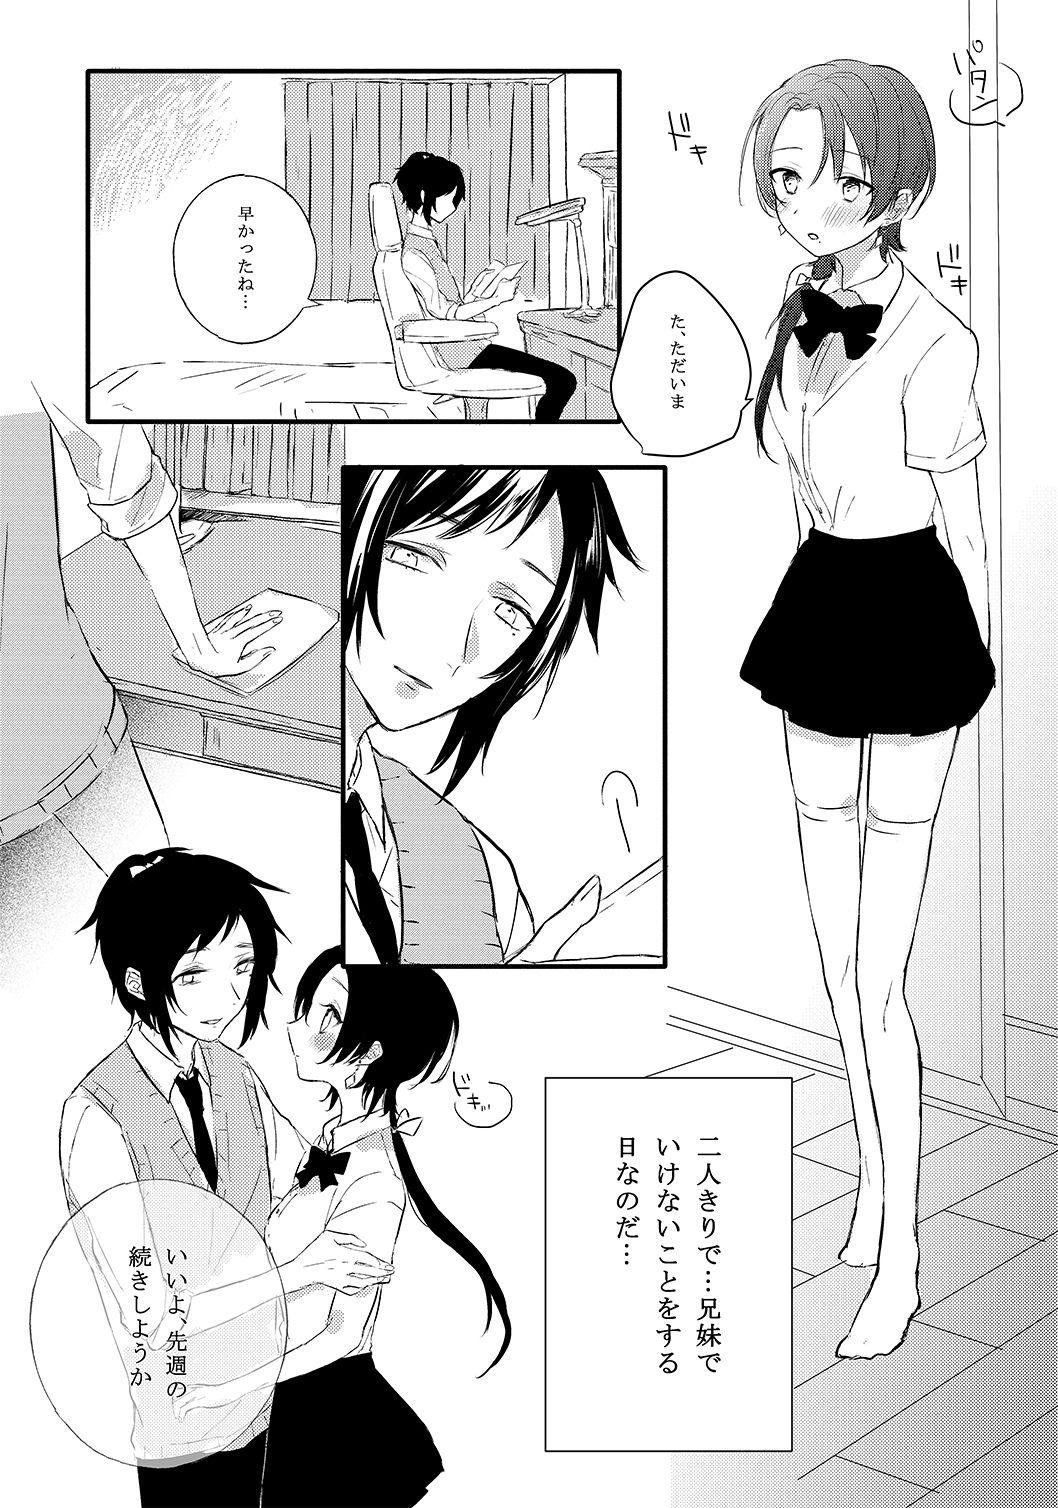 Thick BROTHER COMPLEX + SISTER COMPLEX - Touken ranbu Neighbor - Page 4